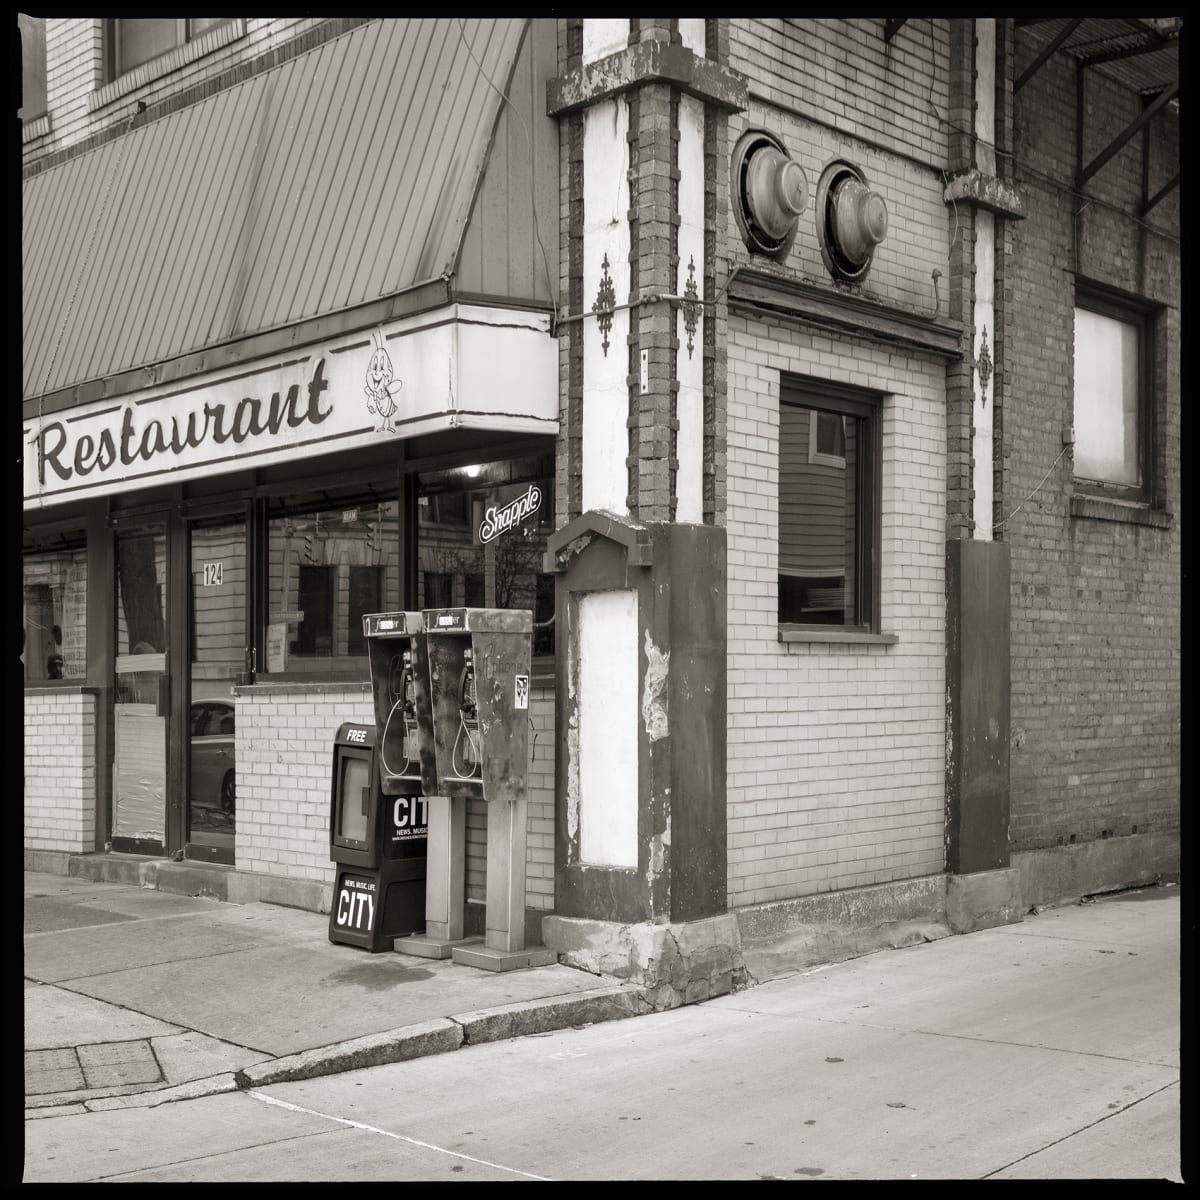 585.232.9542 & 585.232.9262 – Busy Bee Restaurant, 124 West Main Street, Rochester, NY 14614 by Eric T. Kunsman  Image: ID: A black and white image shows a corner restaurant with an awning.  Under there right side of the awning are two pay phones.  The building is surrounded by a side walk.